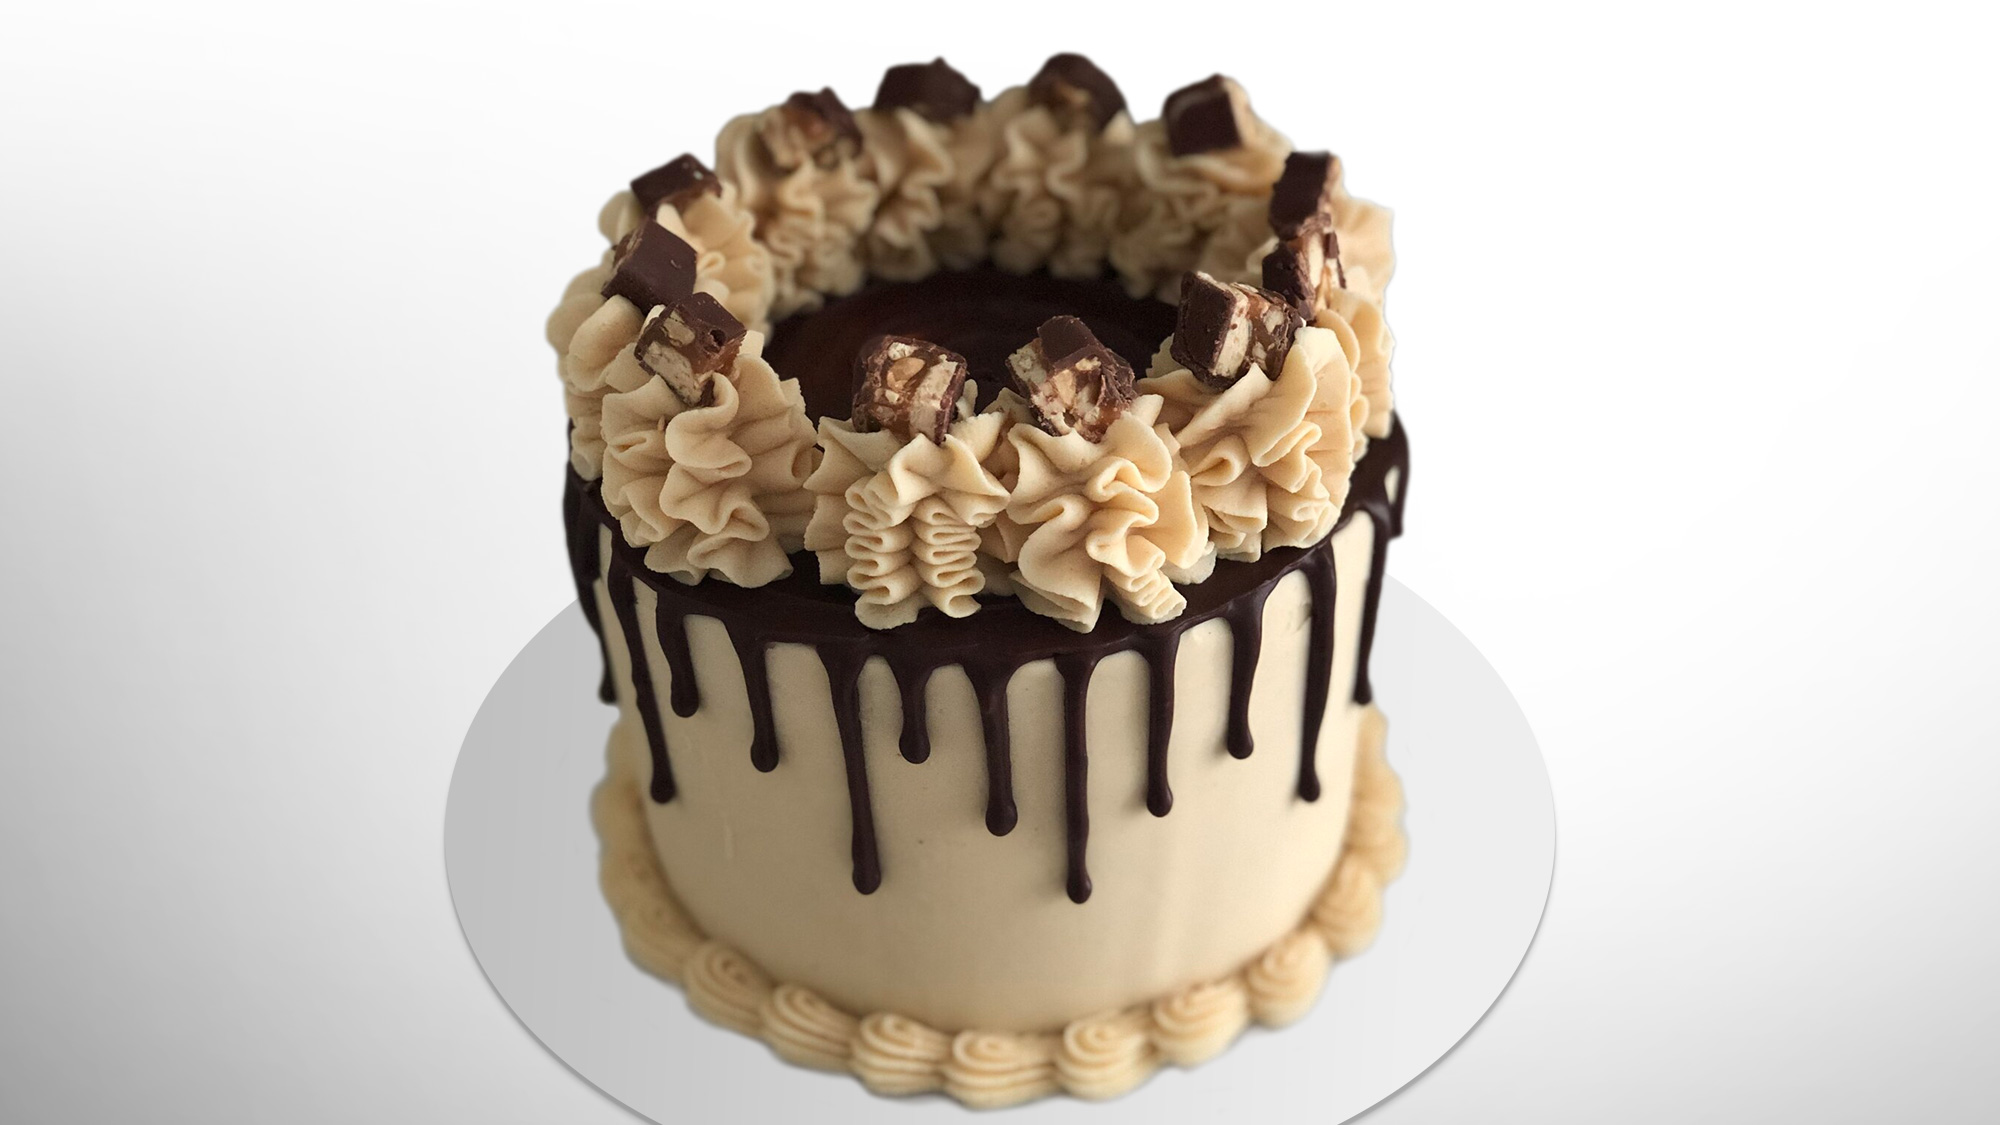 Snicker and Peanut Butter Cake